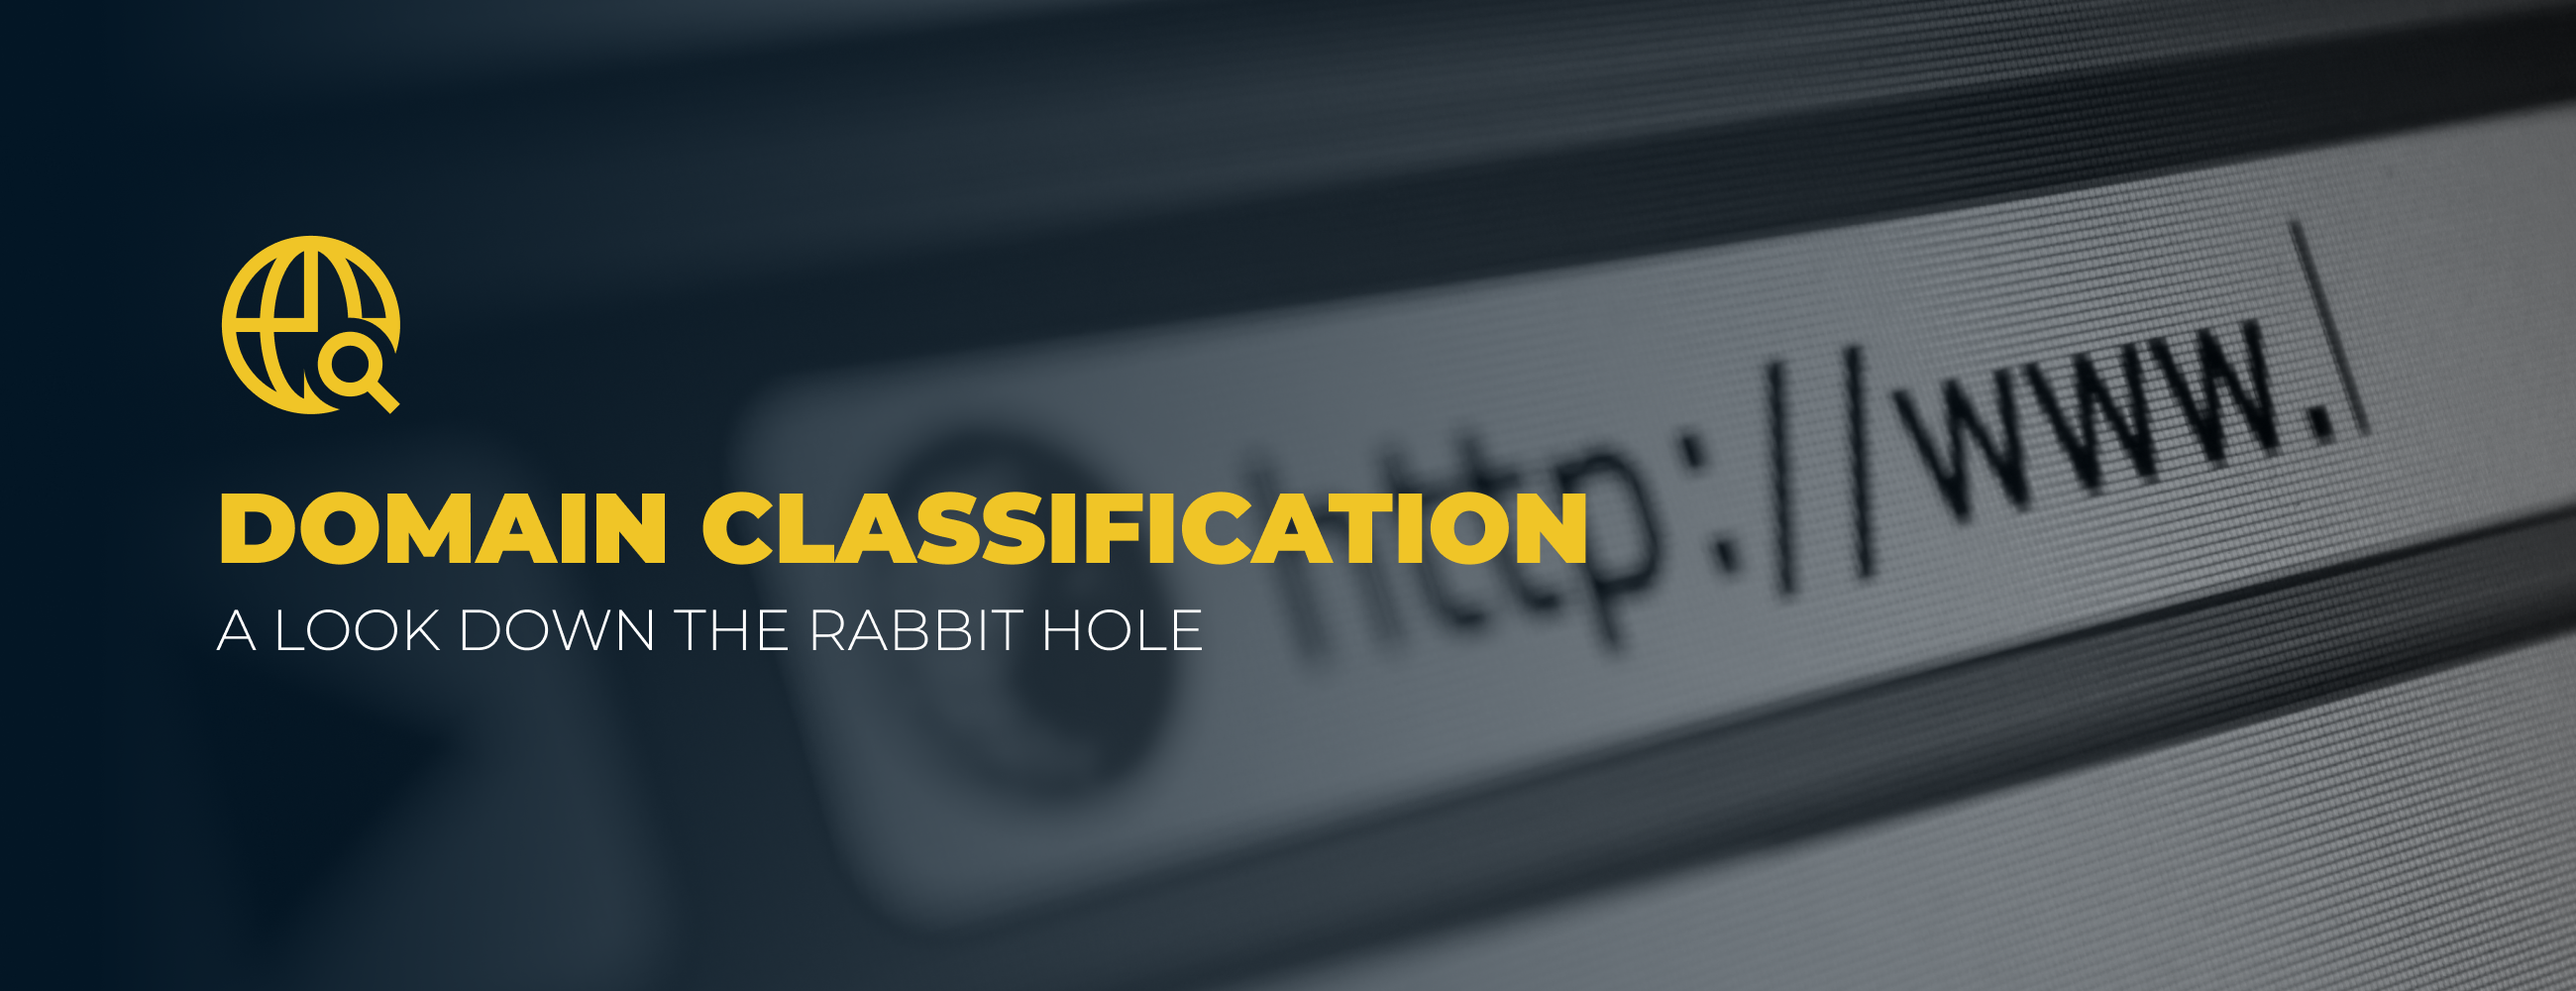 Domain Classification—A Look Down the Rabbit Hole